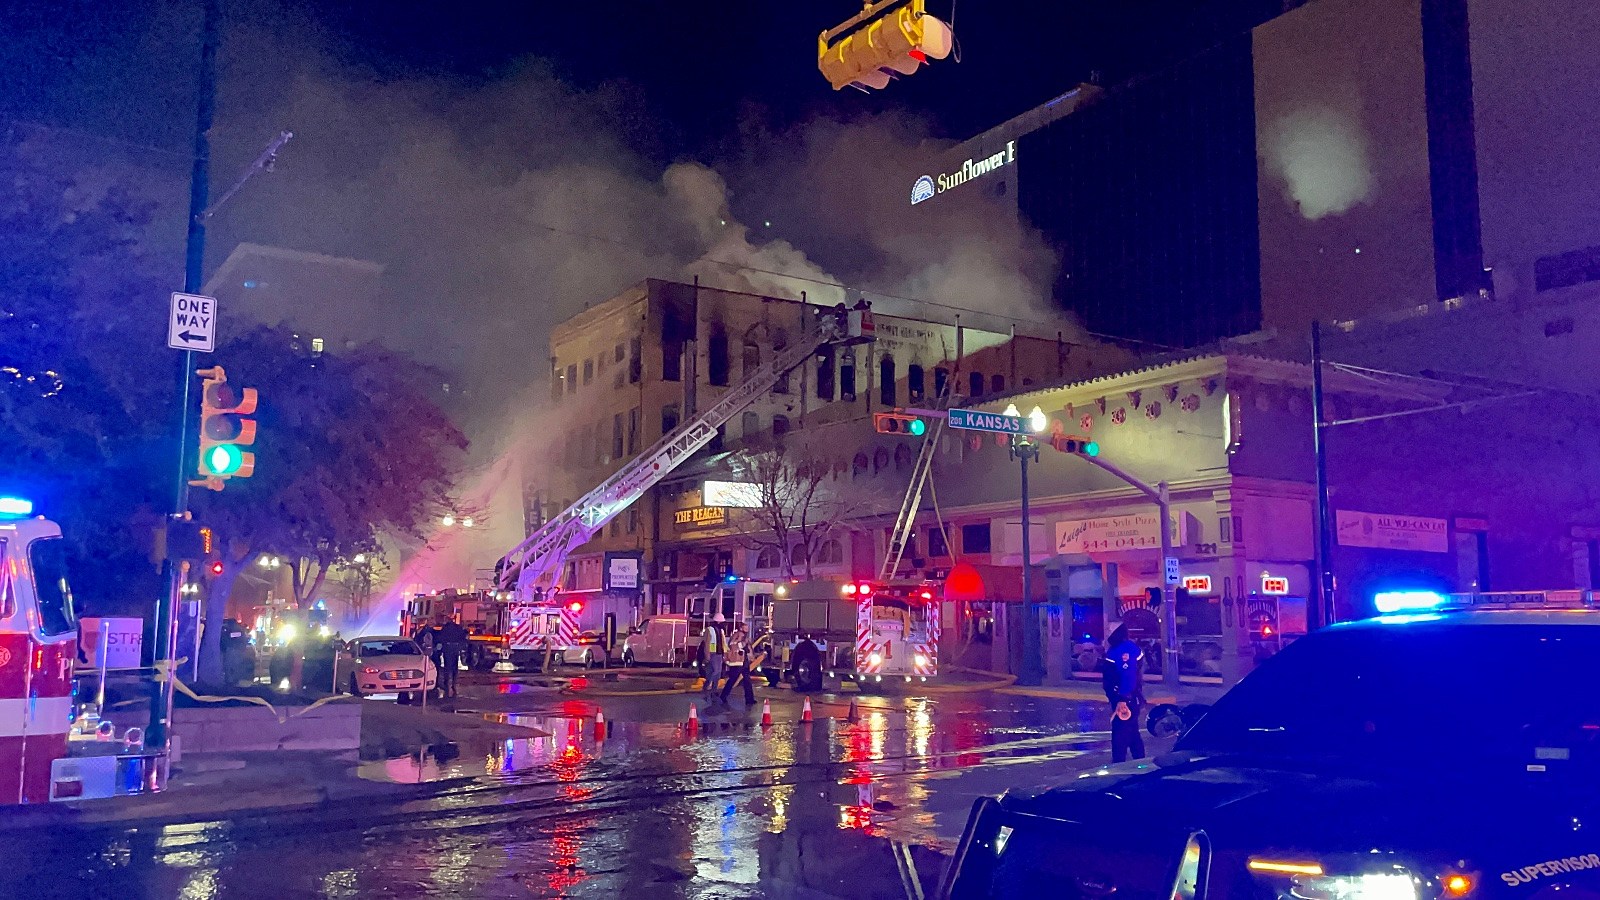 Downtown El Paso Has Lost More Than One Historic Building To Fire pic